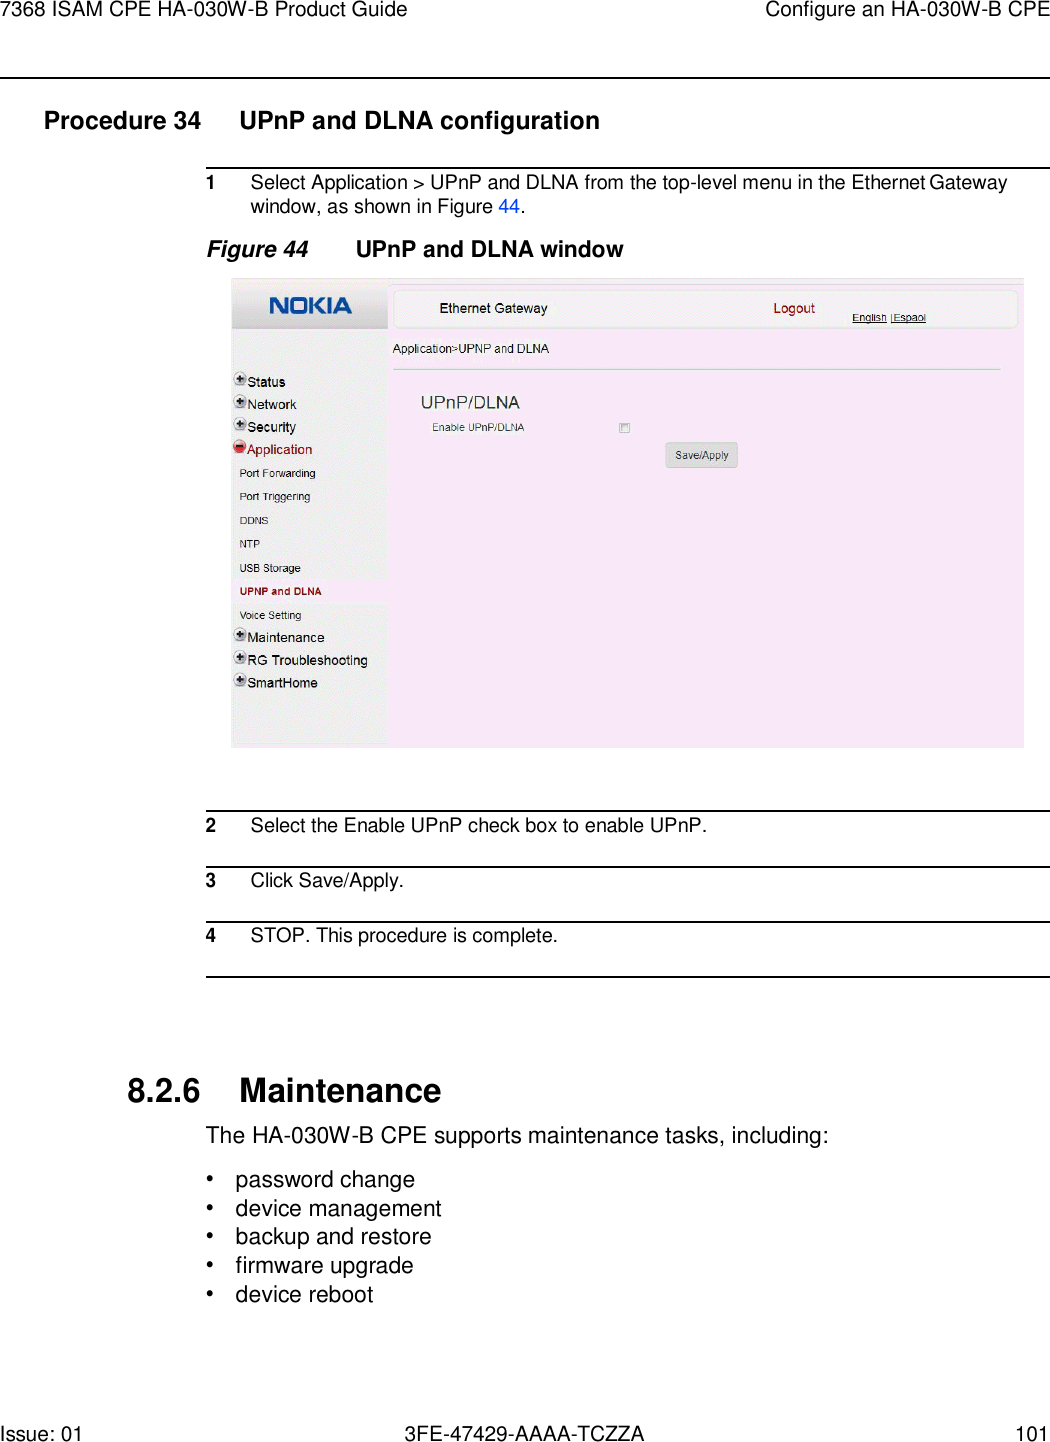 Page 101 of Nokia Bell HA030WB 7368 Intelligent Services Access Manager CPE User Manual 7368 ISAM CPE HA 020W A Product Guide